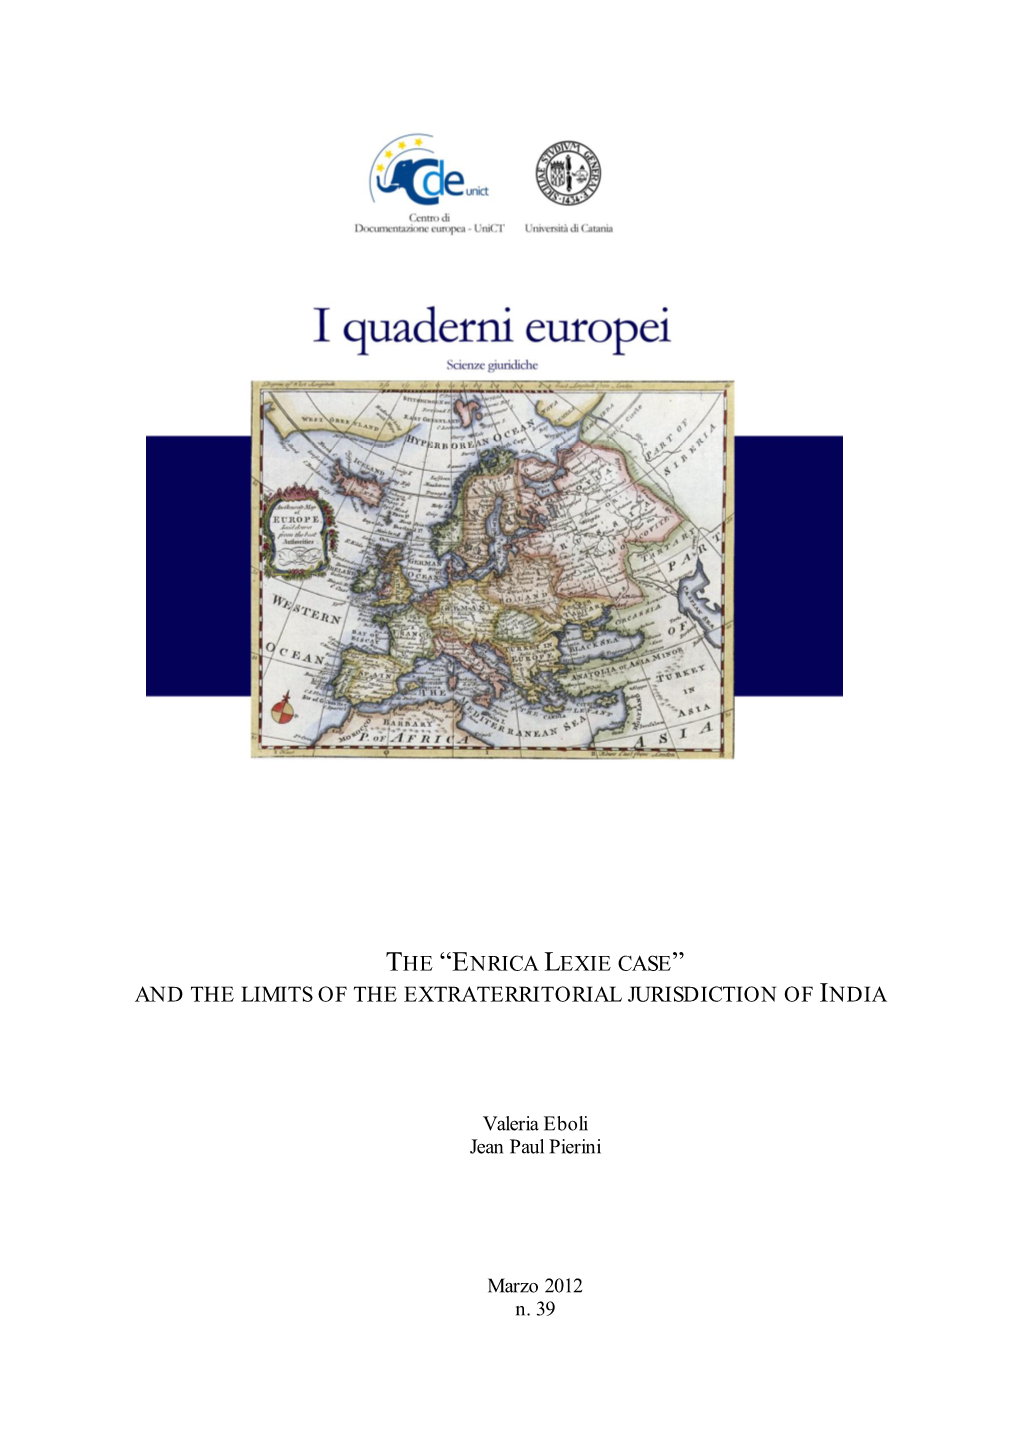 Enrica Lexie Case” and the Limits of the Extraterritorial Jurisdiction of India